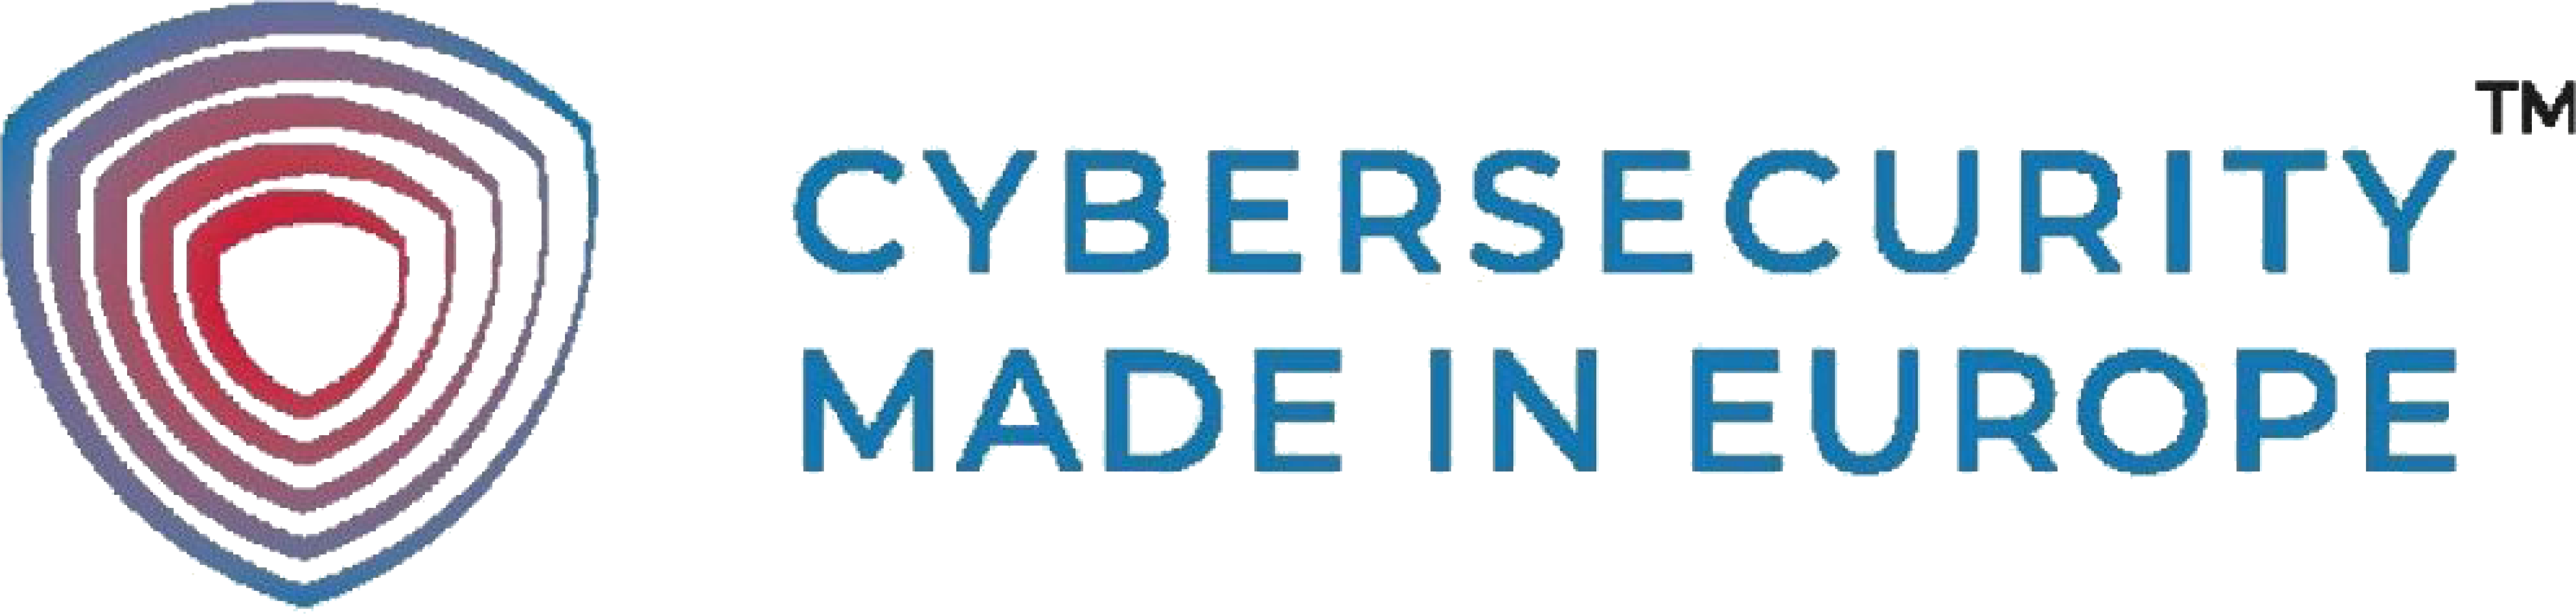 Cybersecurity Made in Europe logo